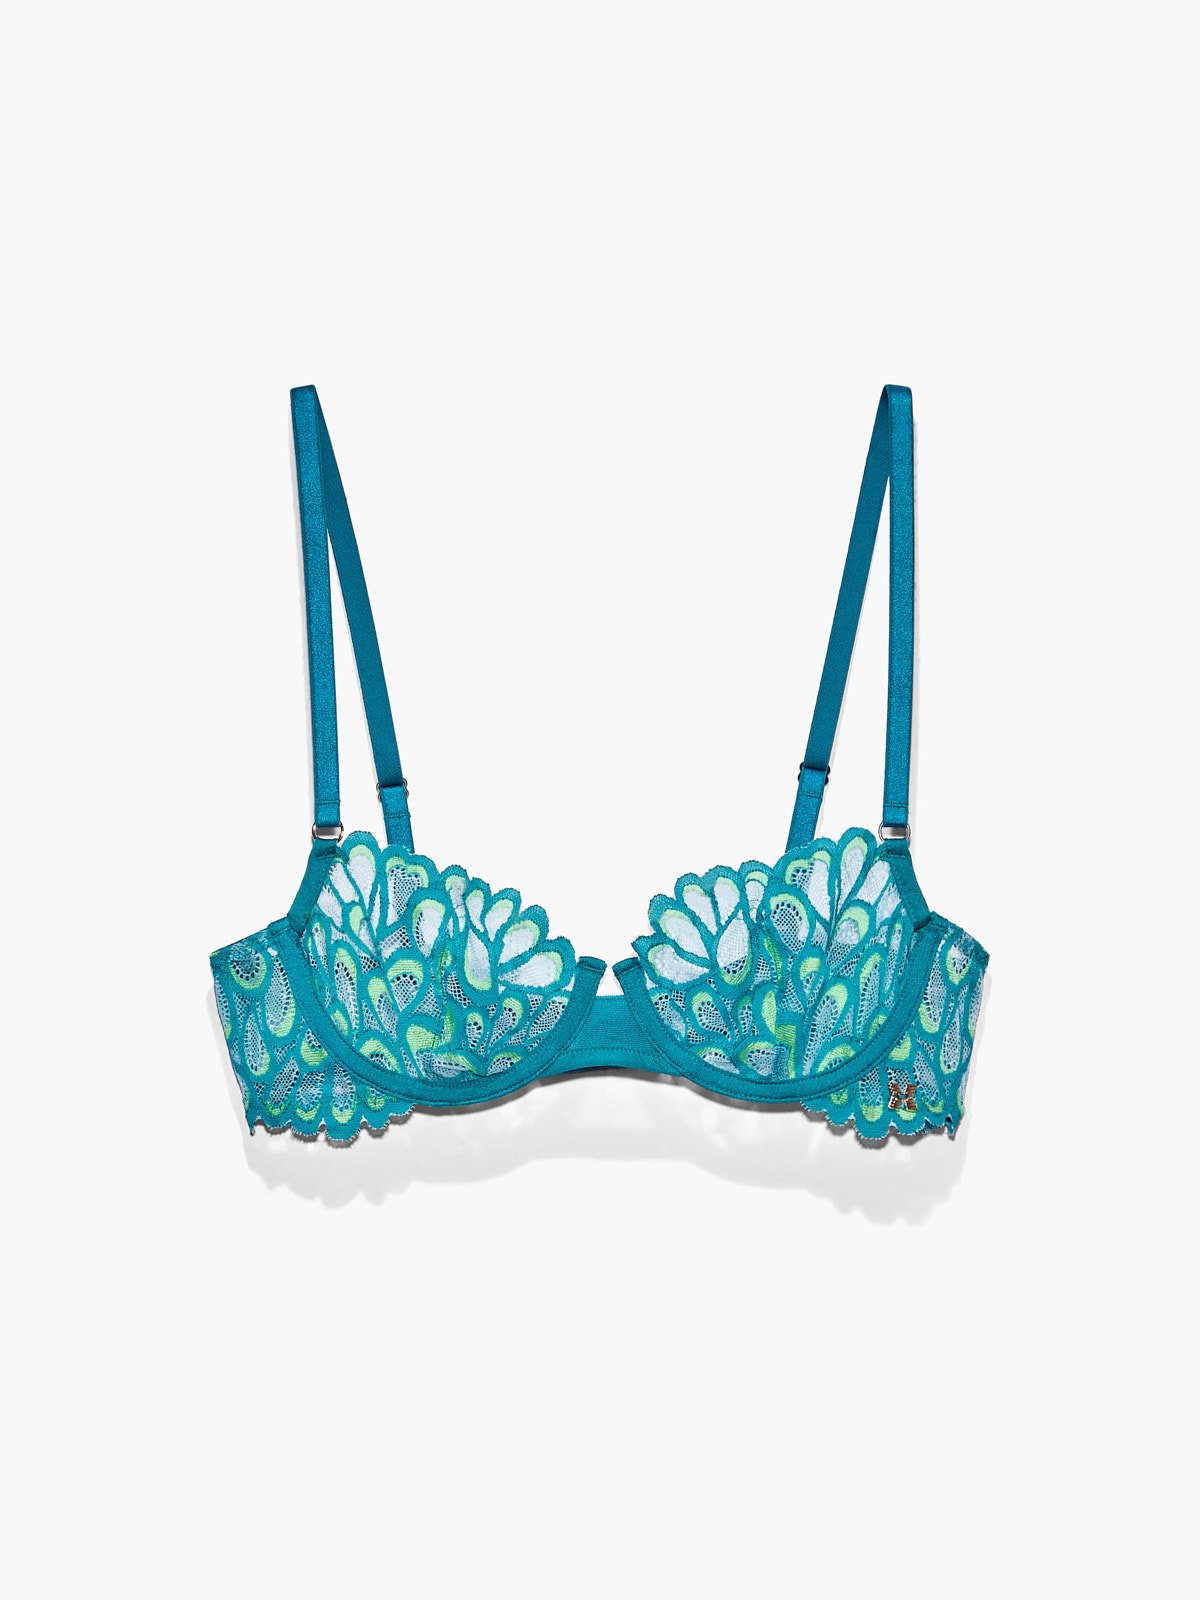 https://cdn.savagex.com/media/images/products/BA2042992-3391/SAVAGE-NOT-SORRY-UNLINED-LACE-BALCONETTE-BRA-BA2042992-3391-LAYDOWN-1200x1600.jpg